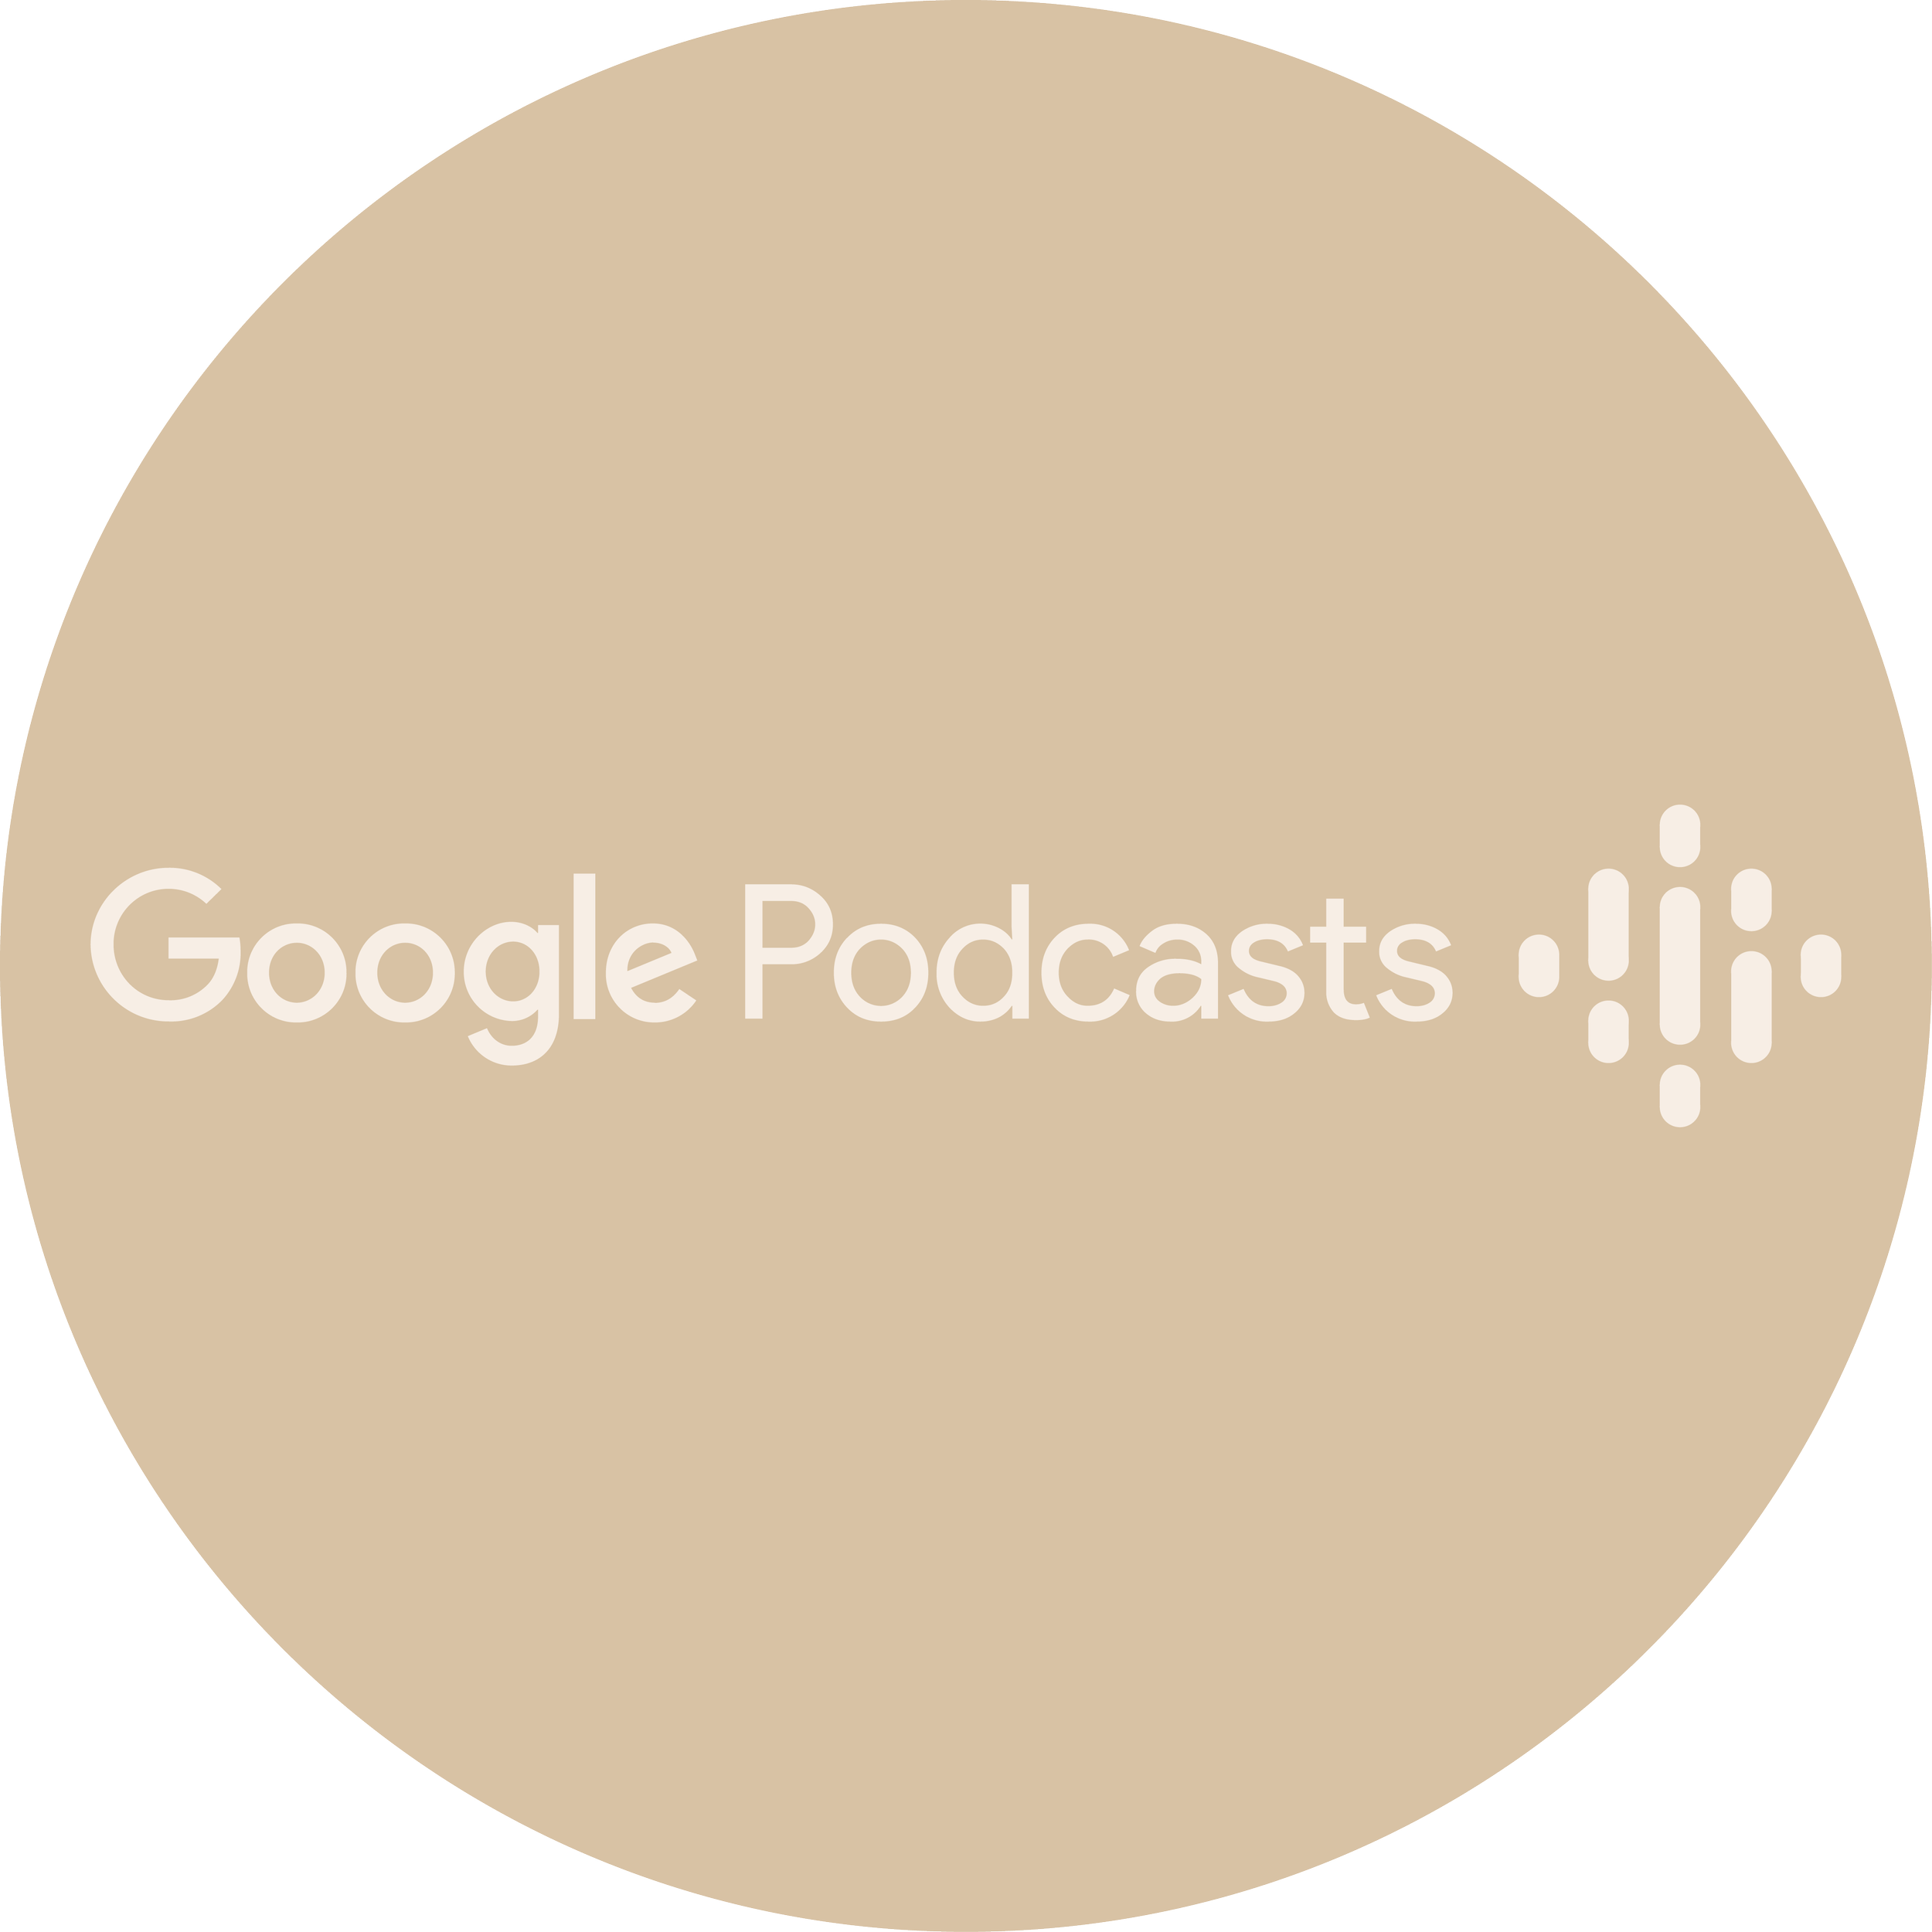 Podcast App Logos_Google Podcasts.png